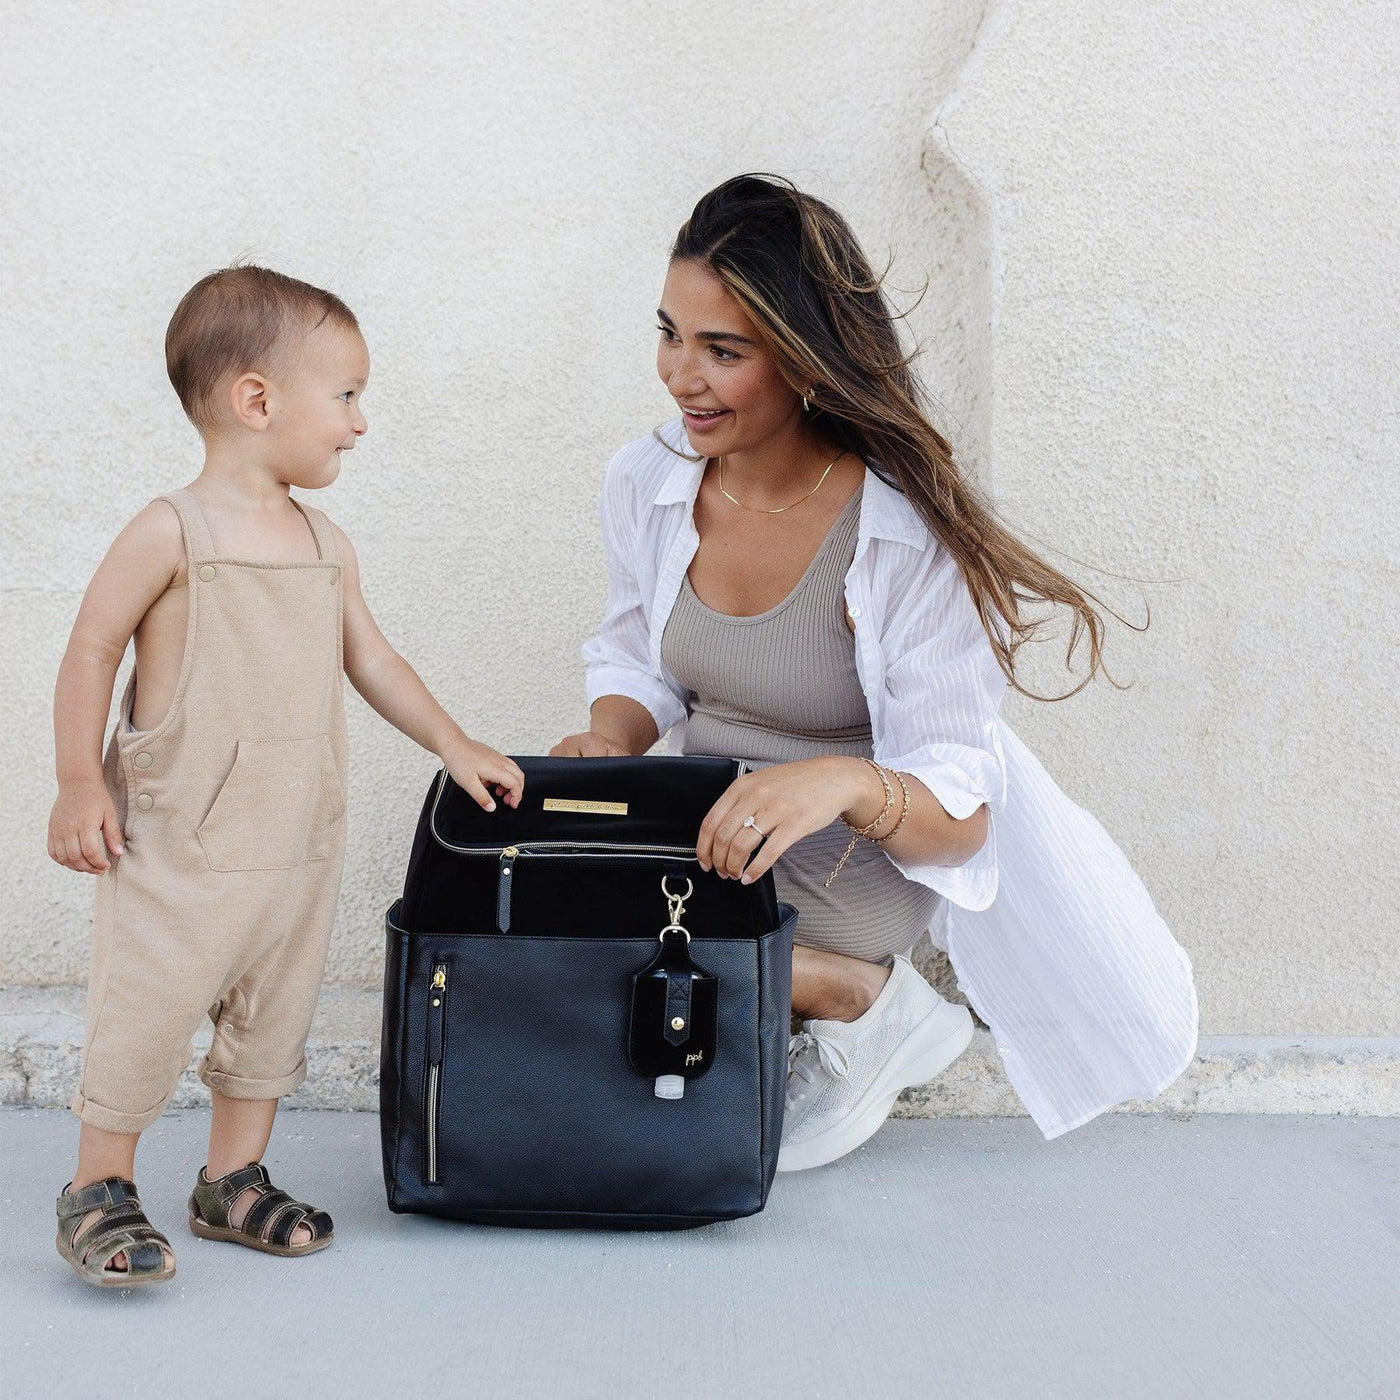 Tempo Backpack in Twilight Black & Moby Evolution Wrap in Sunbeam Bundle-Diaper Bags-Petunia Pickle Bottom